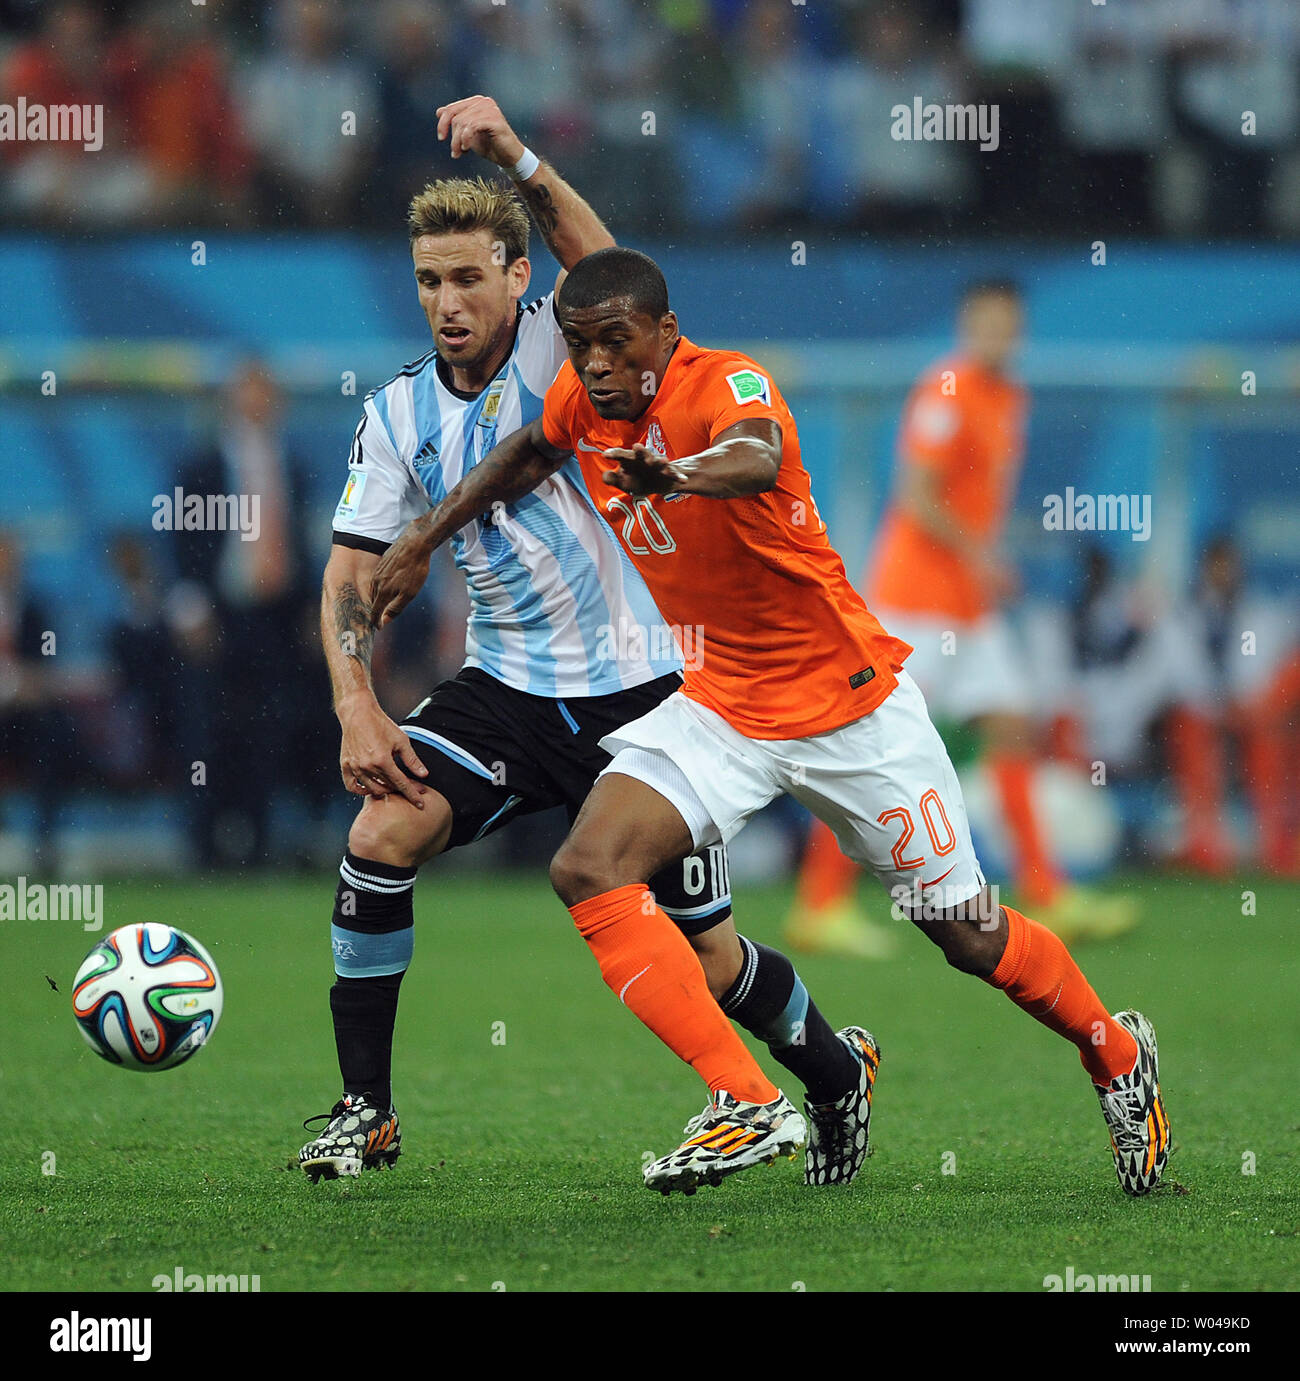 Georginio Wijnaldum of the Netherlands competes with Lucas Biglia (L) of Argentina during the 2014 FIFA World Cup Semi Final match at the Arena Corinthians in Sao Paulo, Brazil on July 09, 2014. UPI/Chris Brunskill Stock Photo